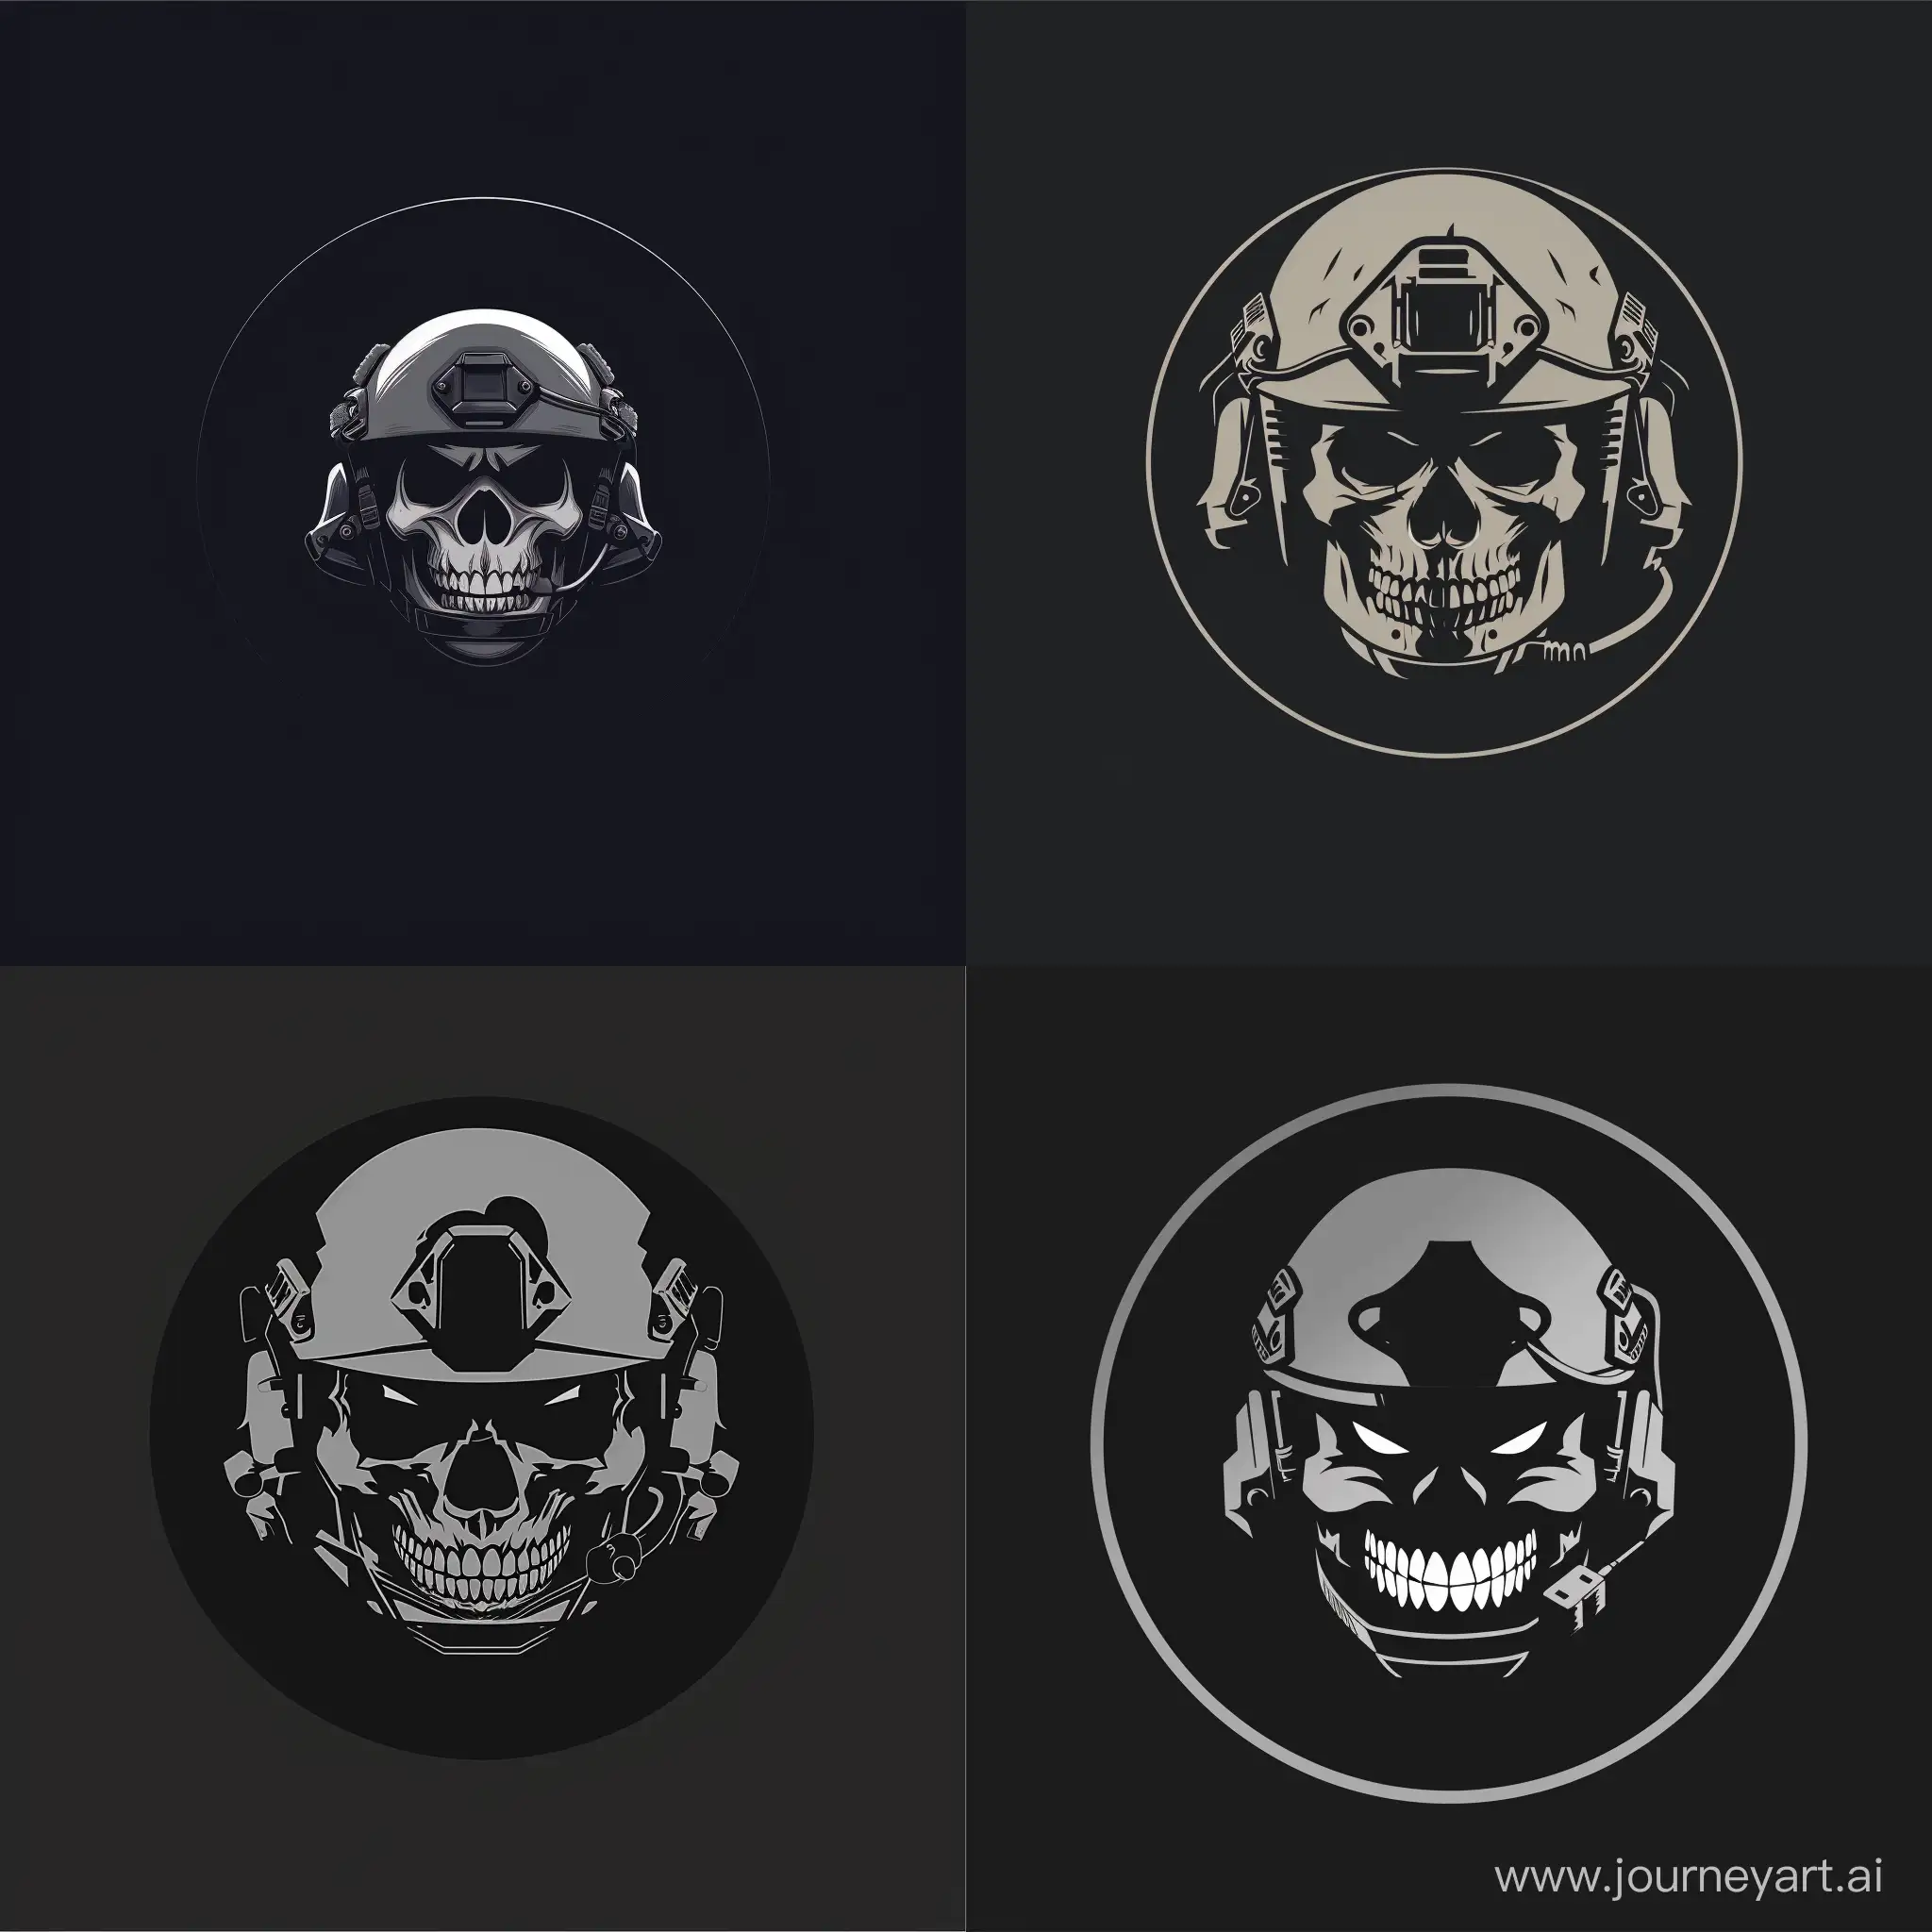 Minimalistic-Military-Logo-with-Angry-Smile-and-Skull-Mask-on-Black-Background